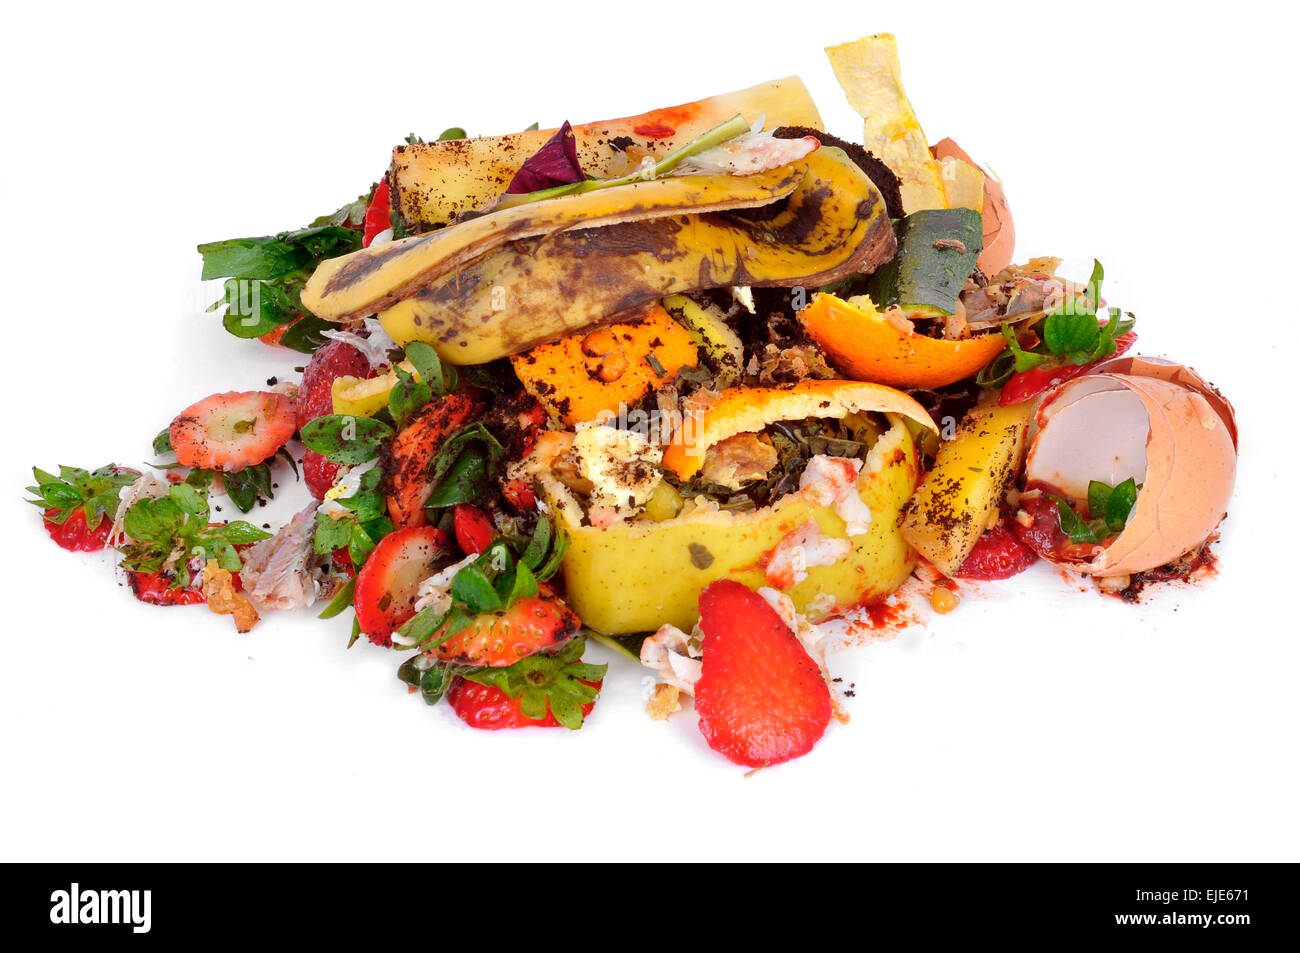 a pile of food waste, such as eggshells and fruit and vegetable peels, on a white background Stock Photo